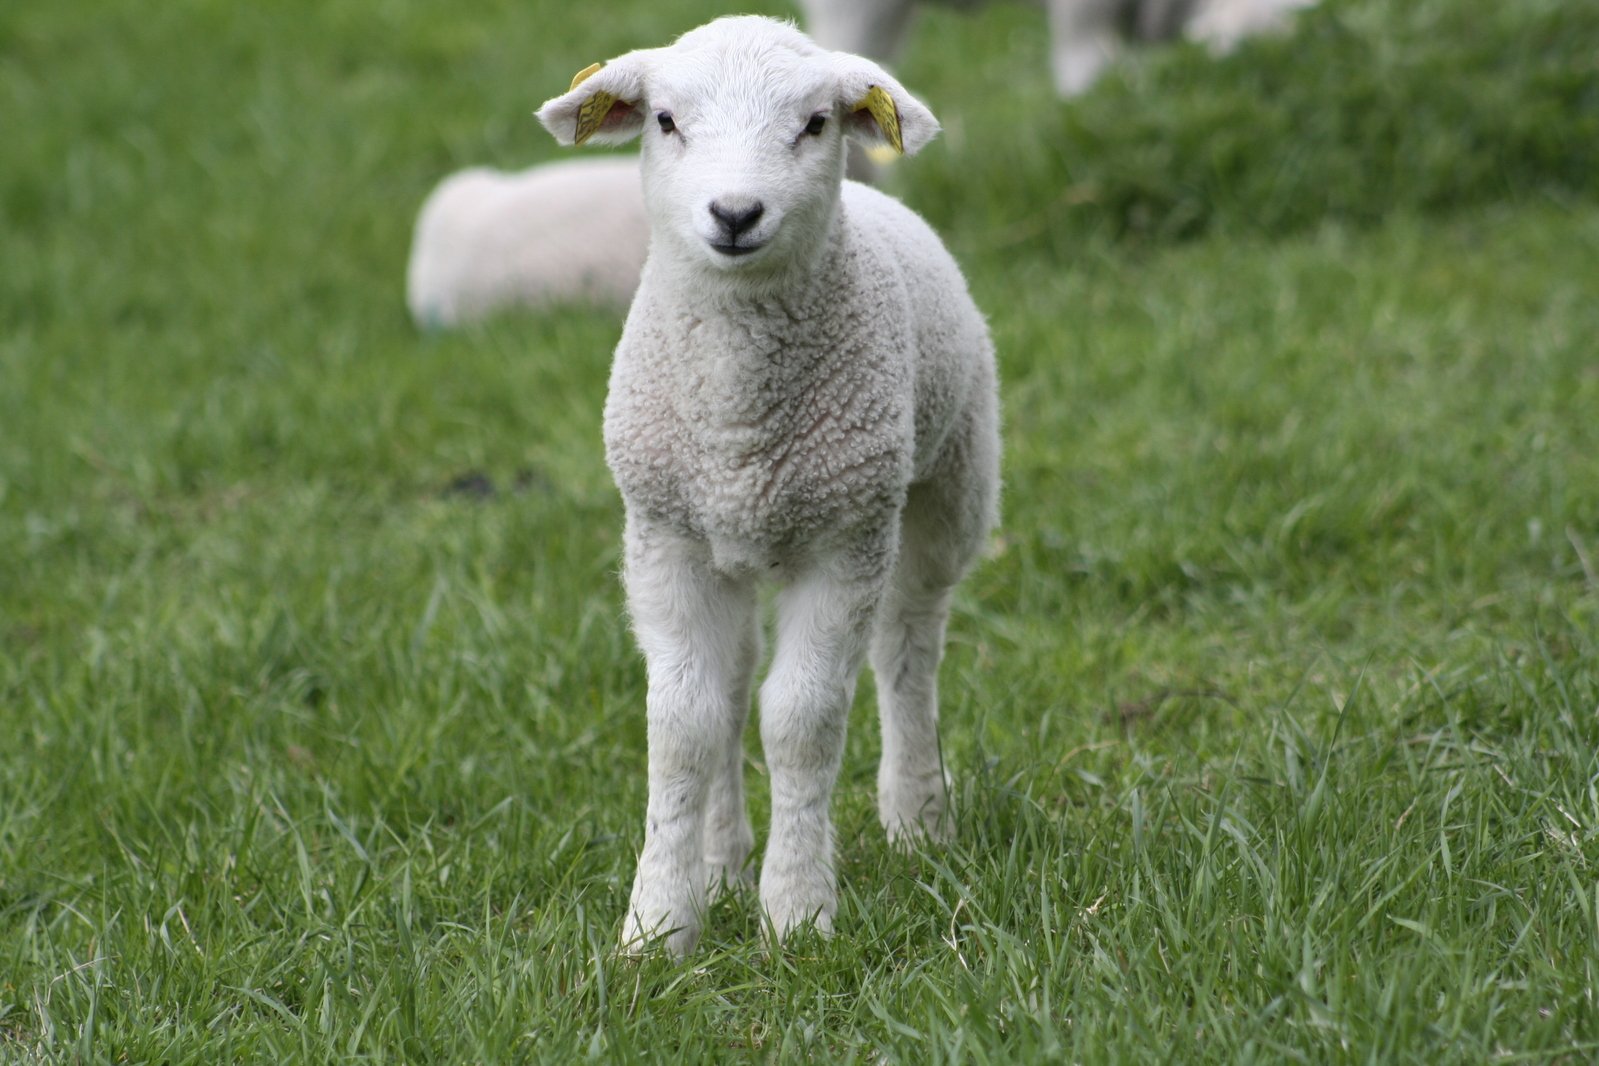 the white lamb stands in a grassy field